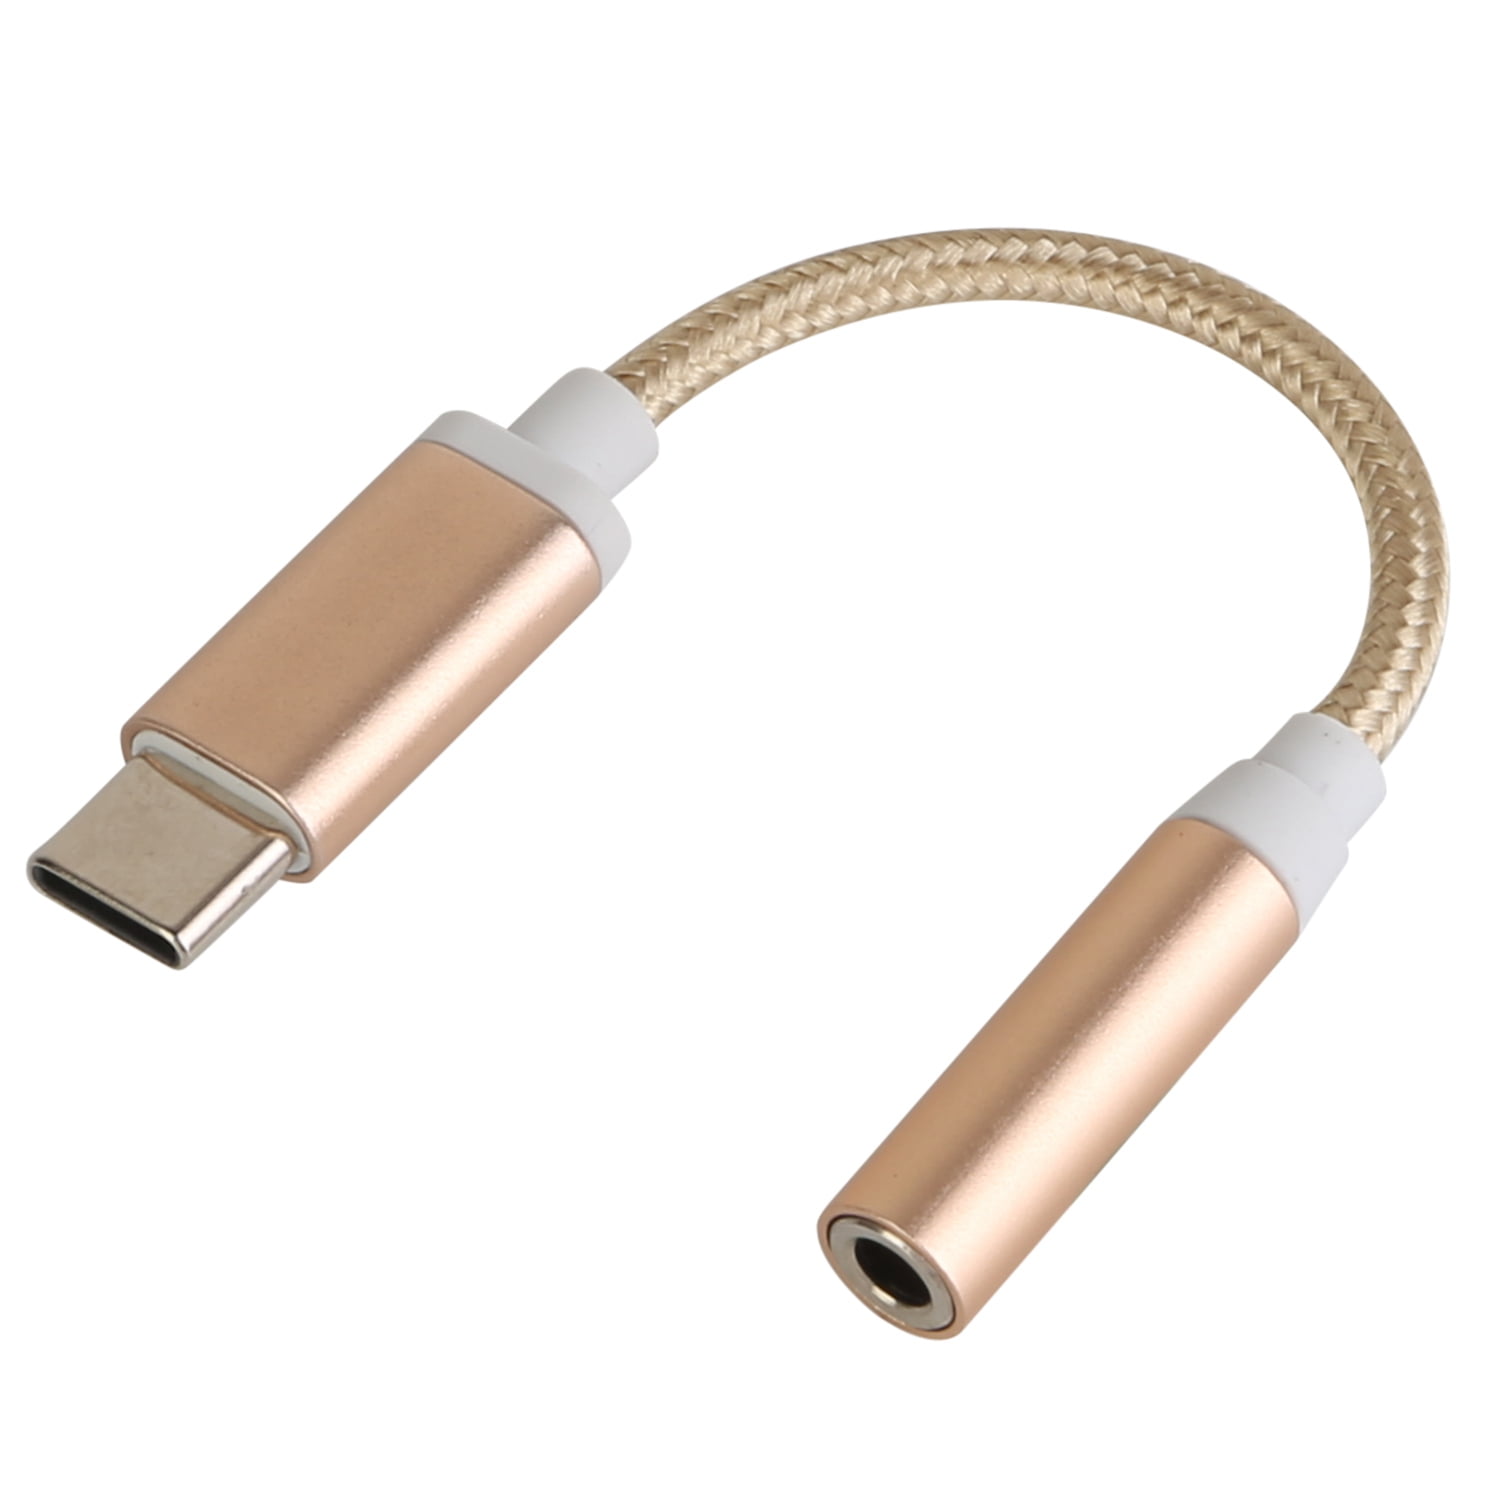 Insten Usb C To 3.5mm Audio Aux Jack Cable, Only Compatible With Ipad Pro,  Galaxy S20 Note 10, Google Pixel 2/3/4 Xl, Oneplus 6t 7 Pro, 3.3ft, White :  Target